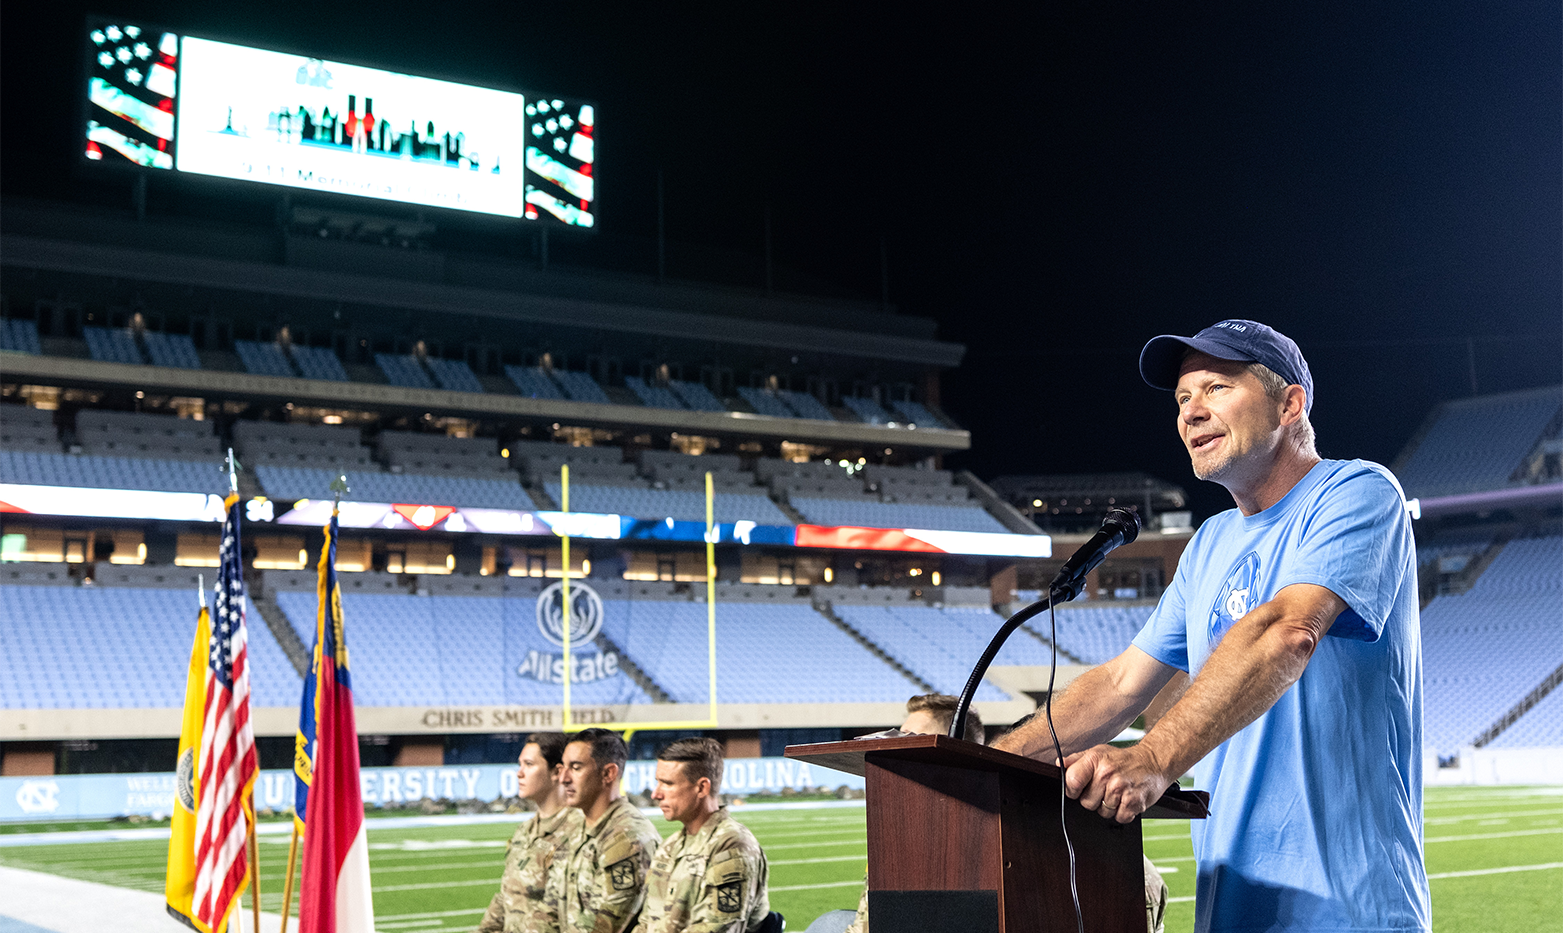 A man standing at a lectern and speaking into a microphone on a football field. Four military members sit slightly behind him to his right, where there are also three flags, including the state of North Carolina flag and the American flag.